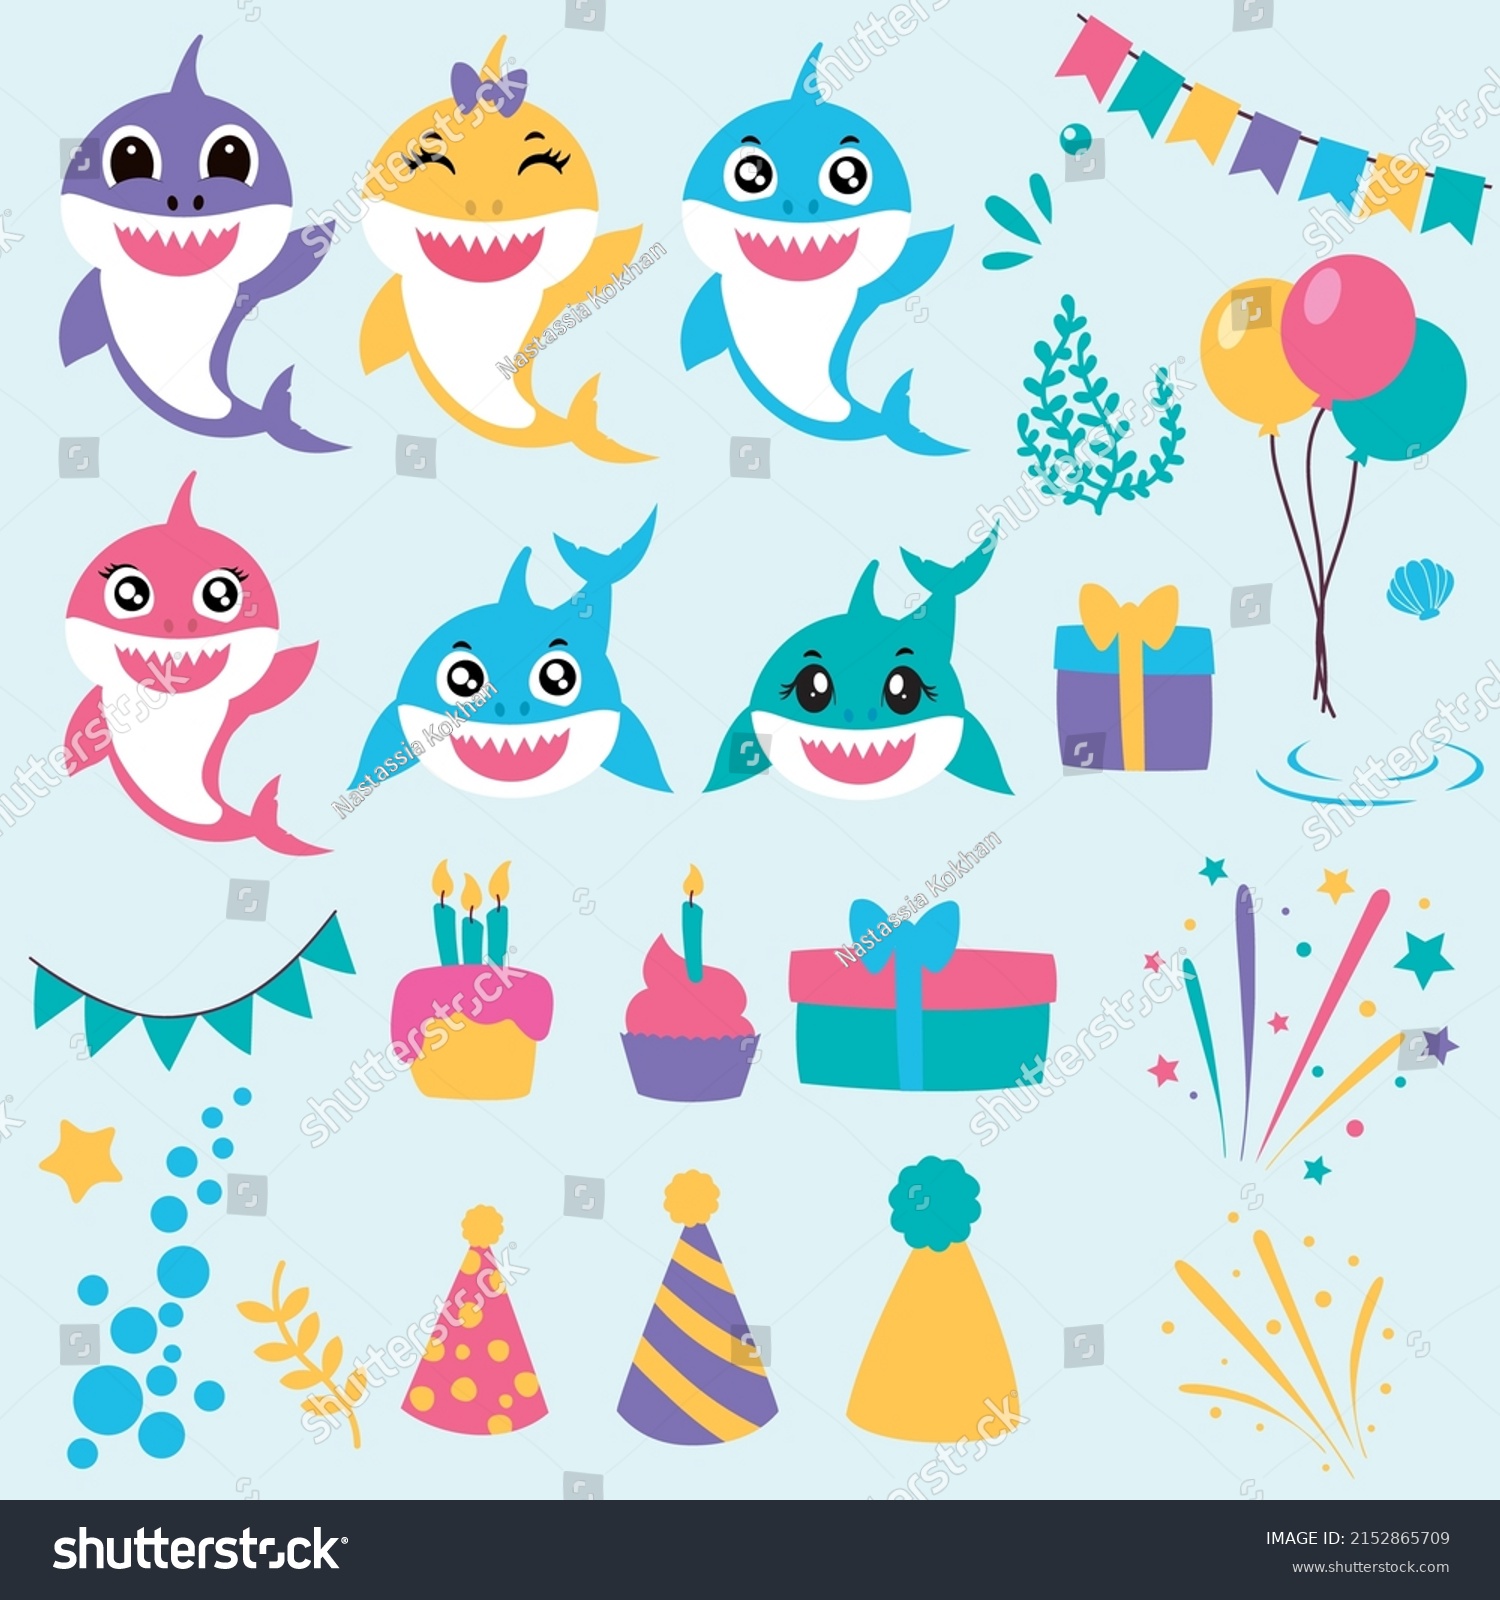 SVG of Birthday shark svg vector Illustration isolated on white background. Baby shark birthday bundle with balloons and elements. Animal clipart for birthday kids party svg